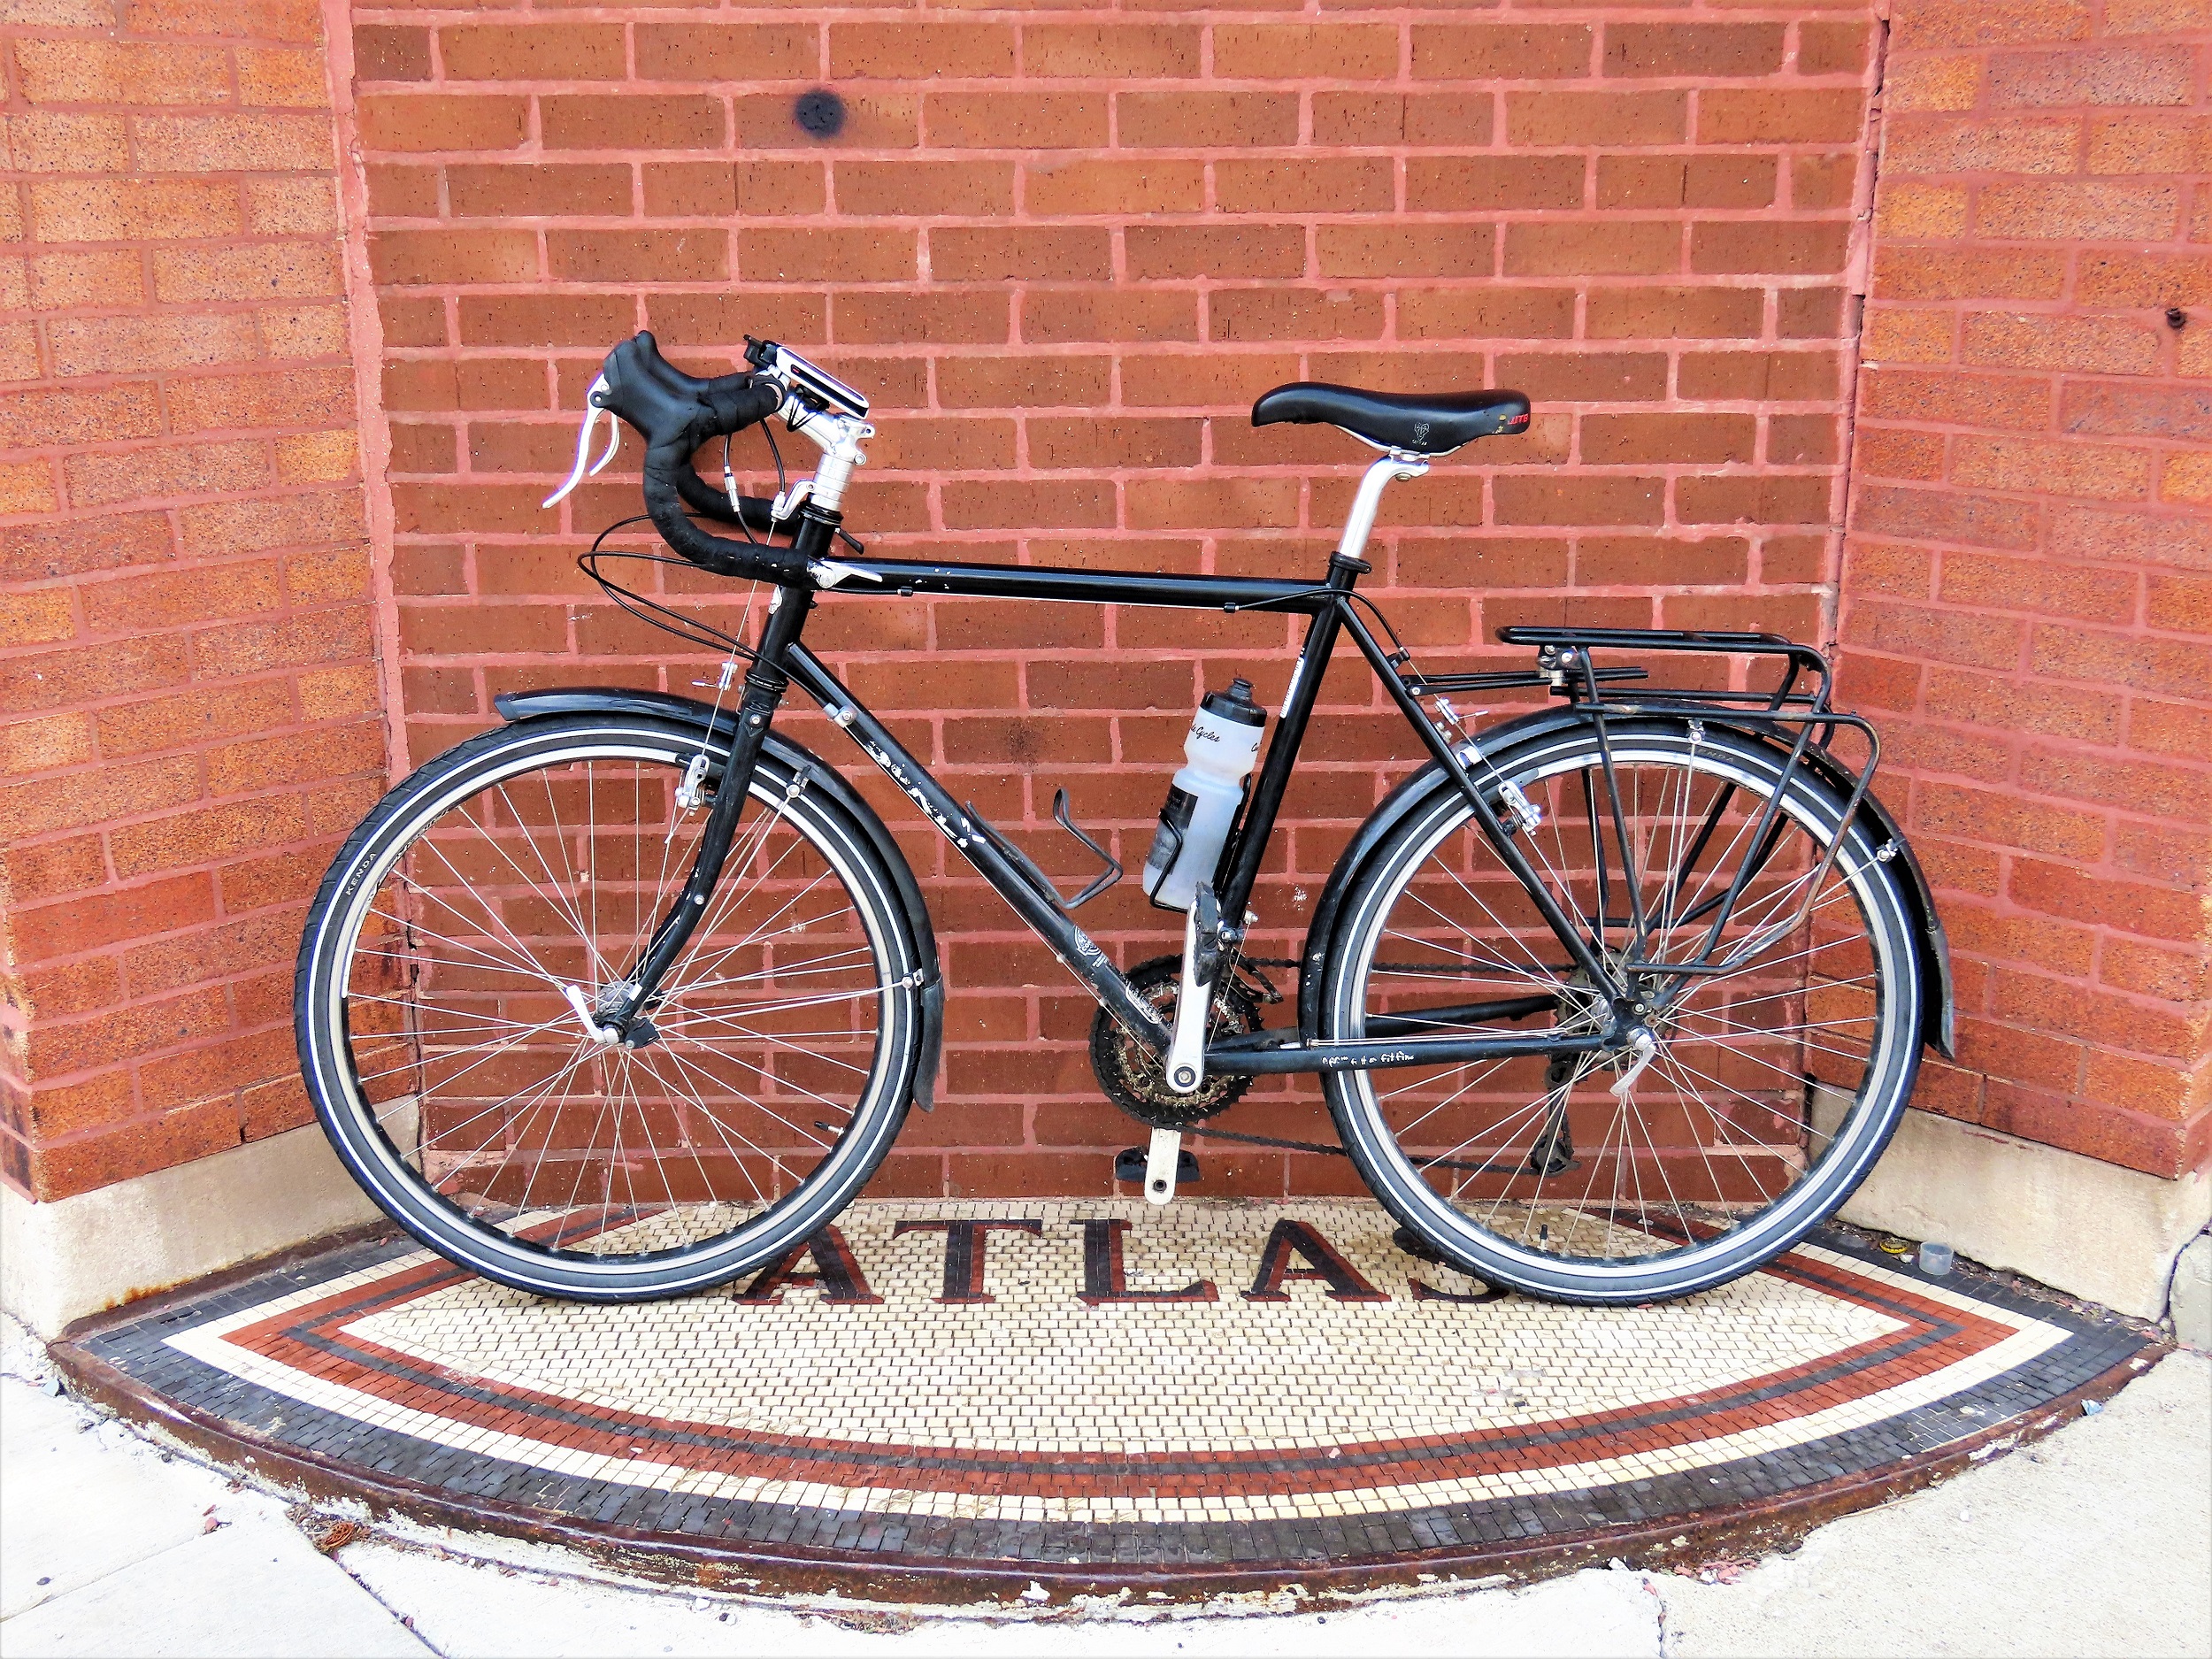 A tour bike standing on an Atlas entrance mosaic to a bricked up entry